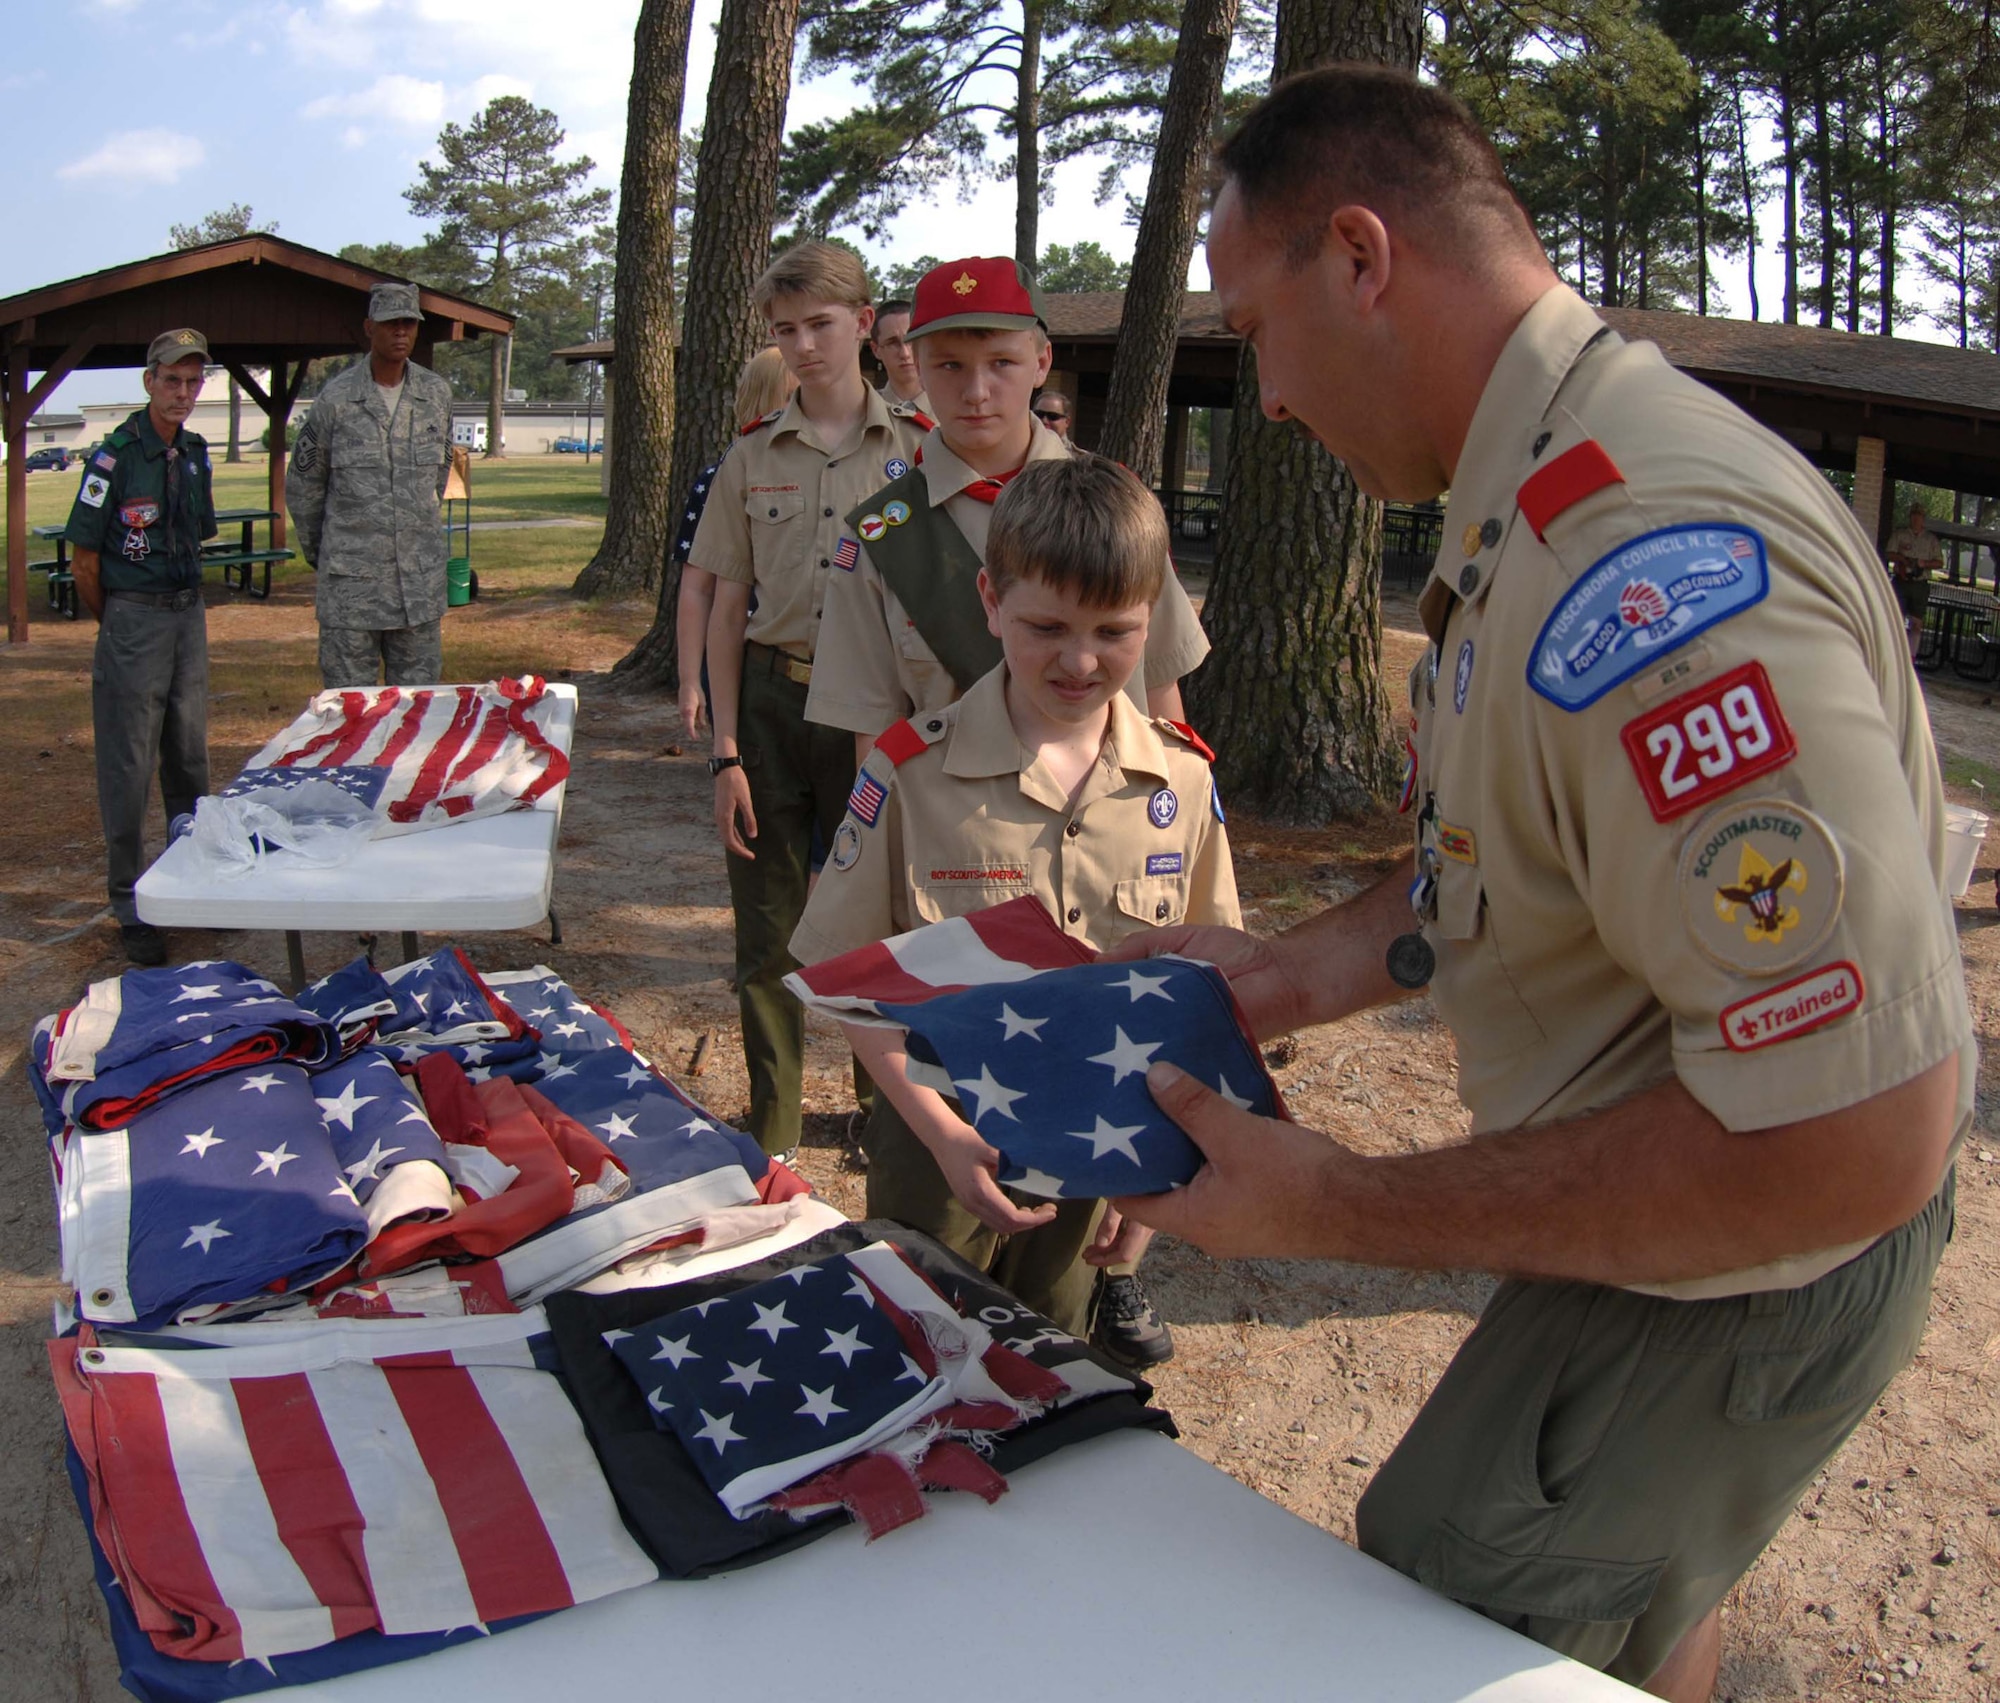 SEYMOUR JOHNSON AIR FORCE BASE, N.C. Leader of the Troop 299 passes out American flags to his troop for a flag retirement ceremony, June 14 2008. (U.S. Air Force photo by Airman 1st Class Gino Reyes)